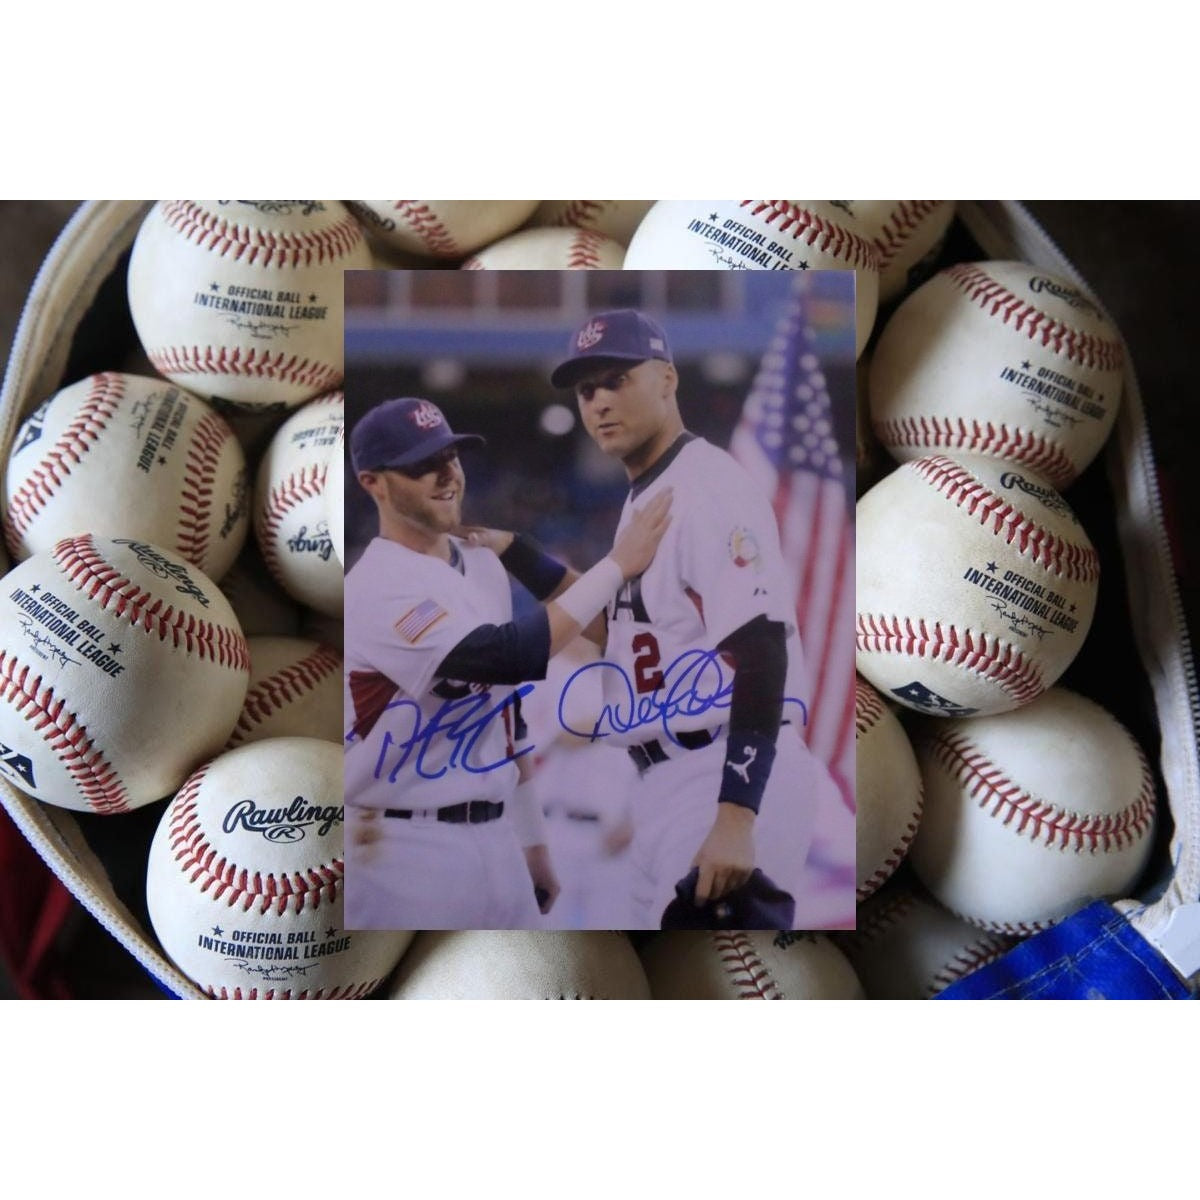 Derek Jeter and Dustin Pedroia 8 by 10 signed photo